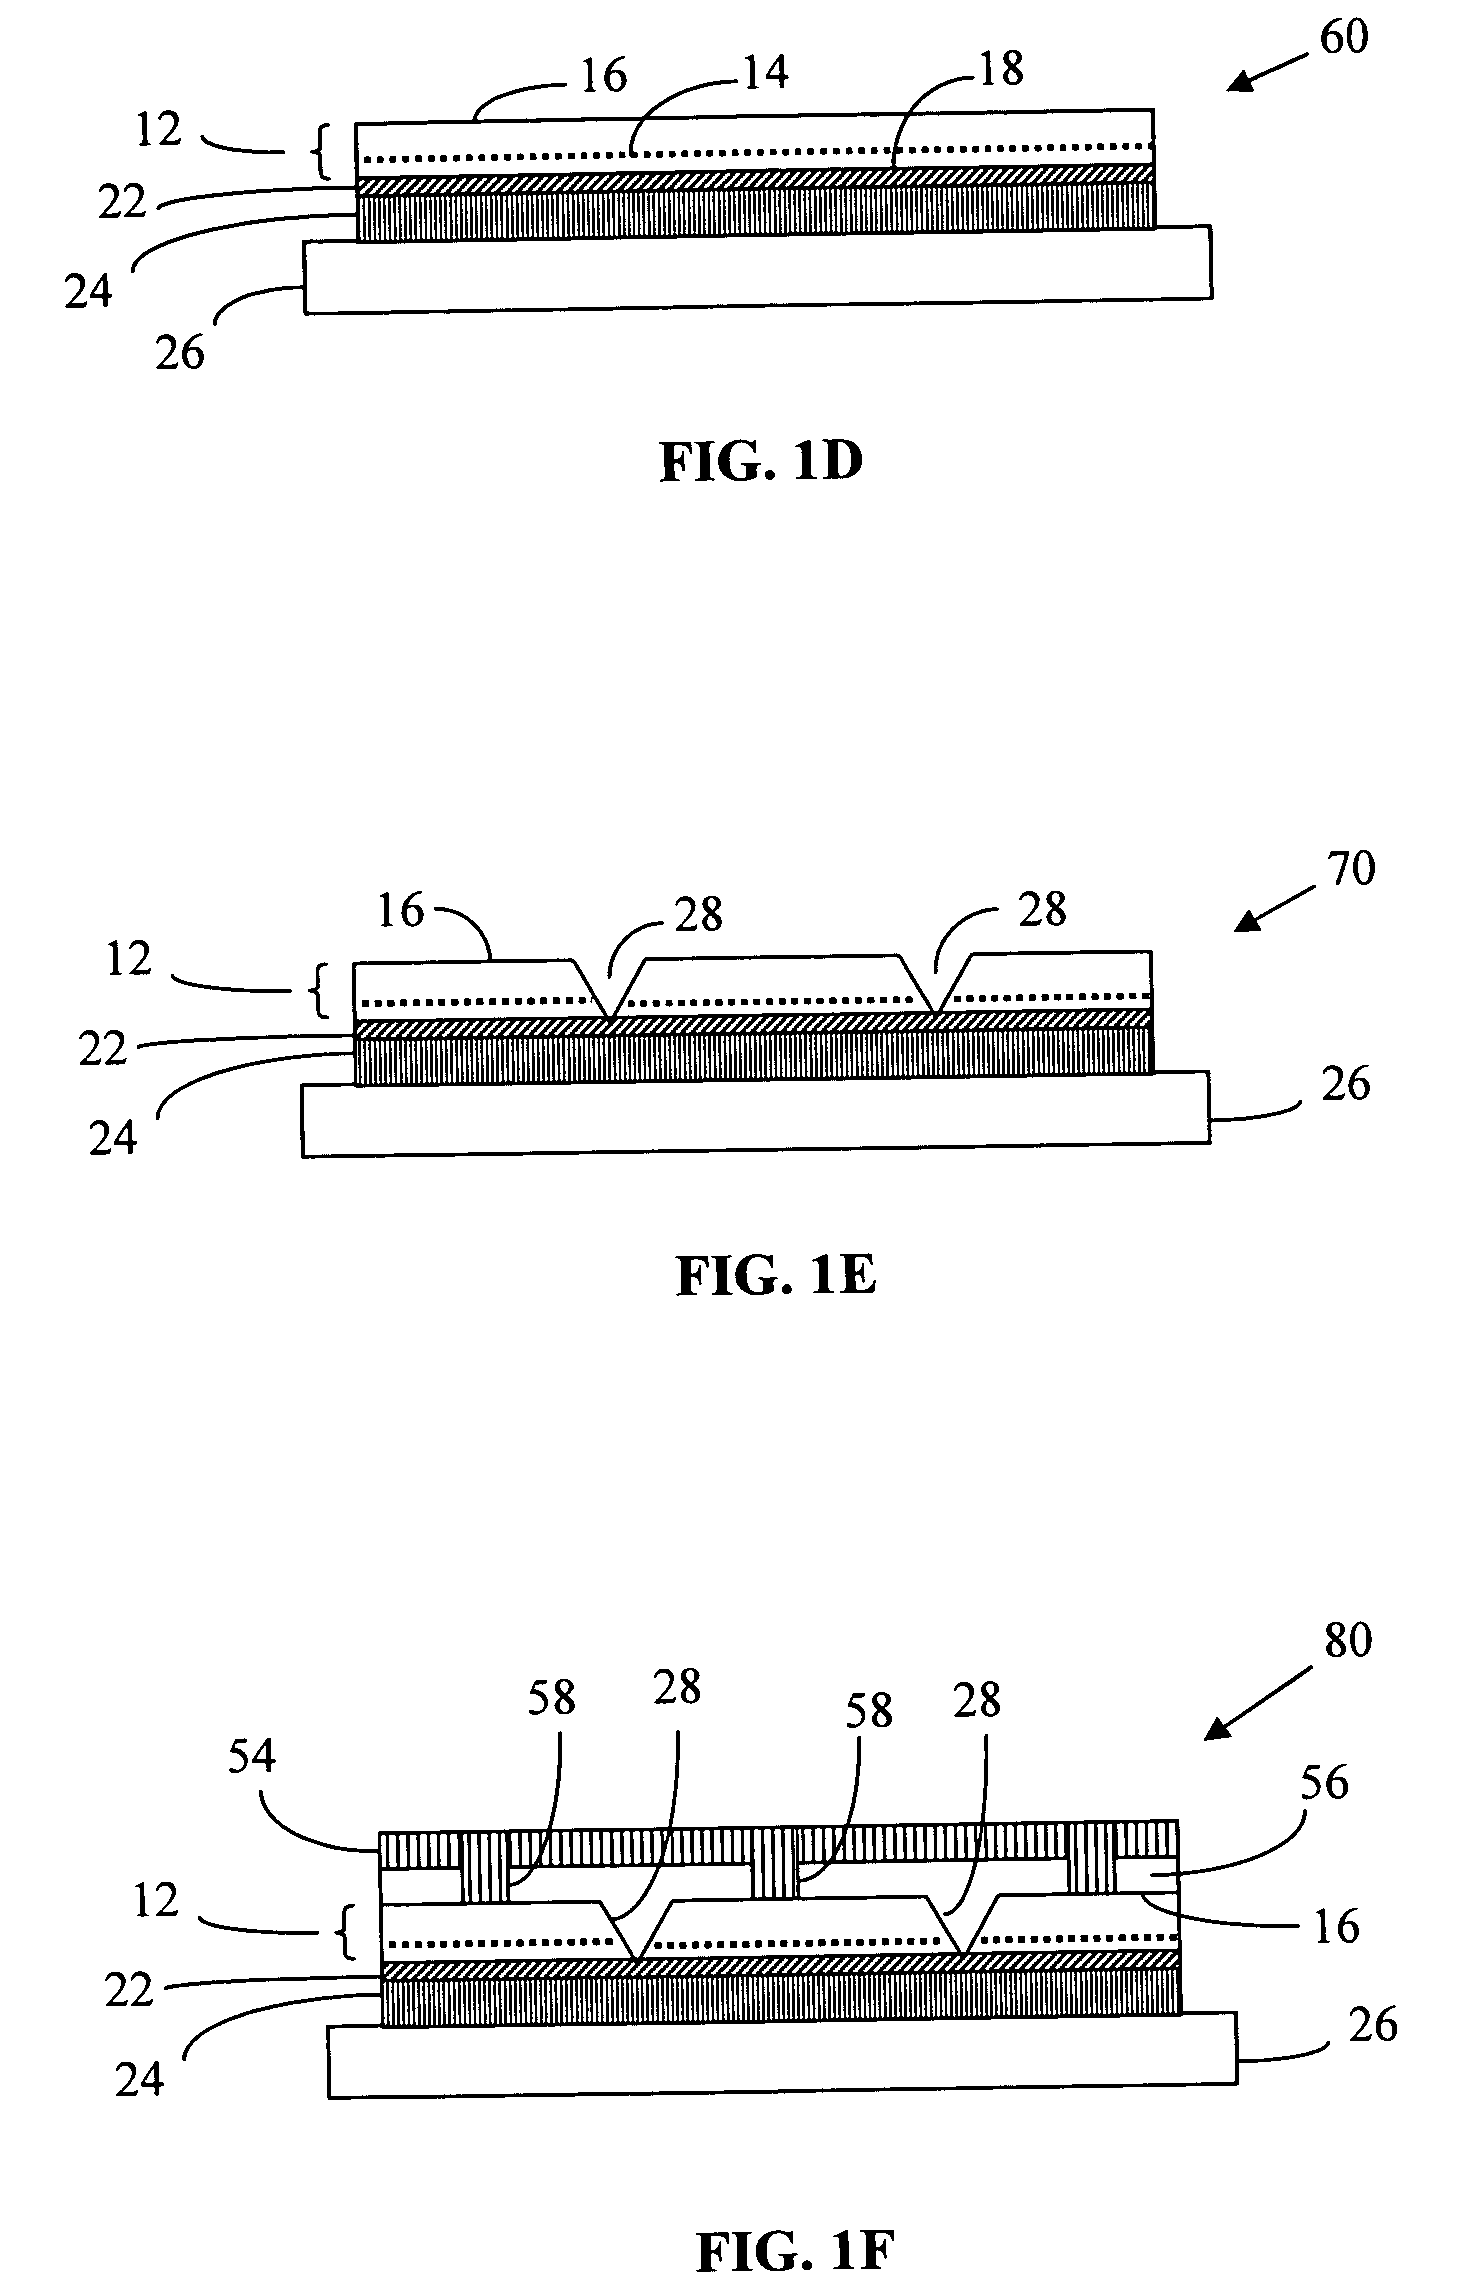 Light emitting diodes exhibiting both high reflectivity and high light extraction